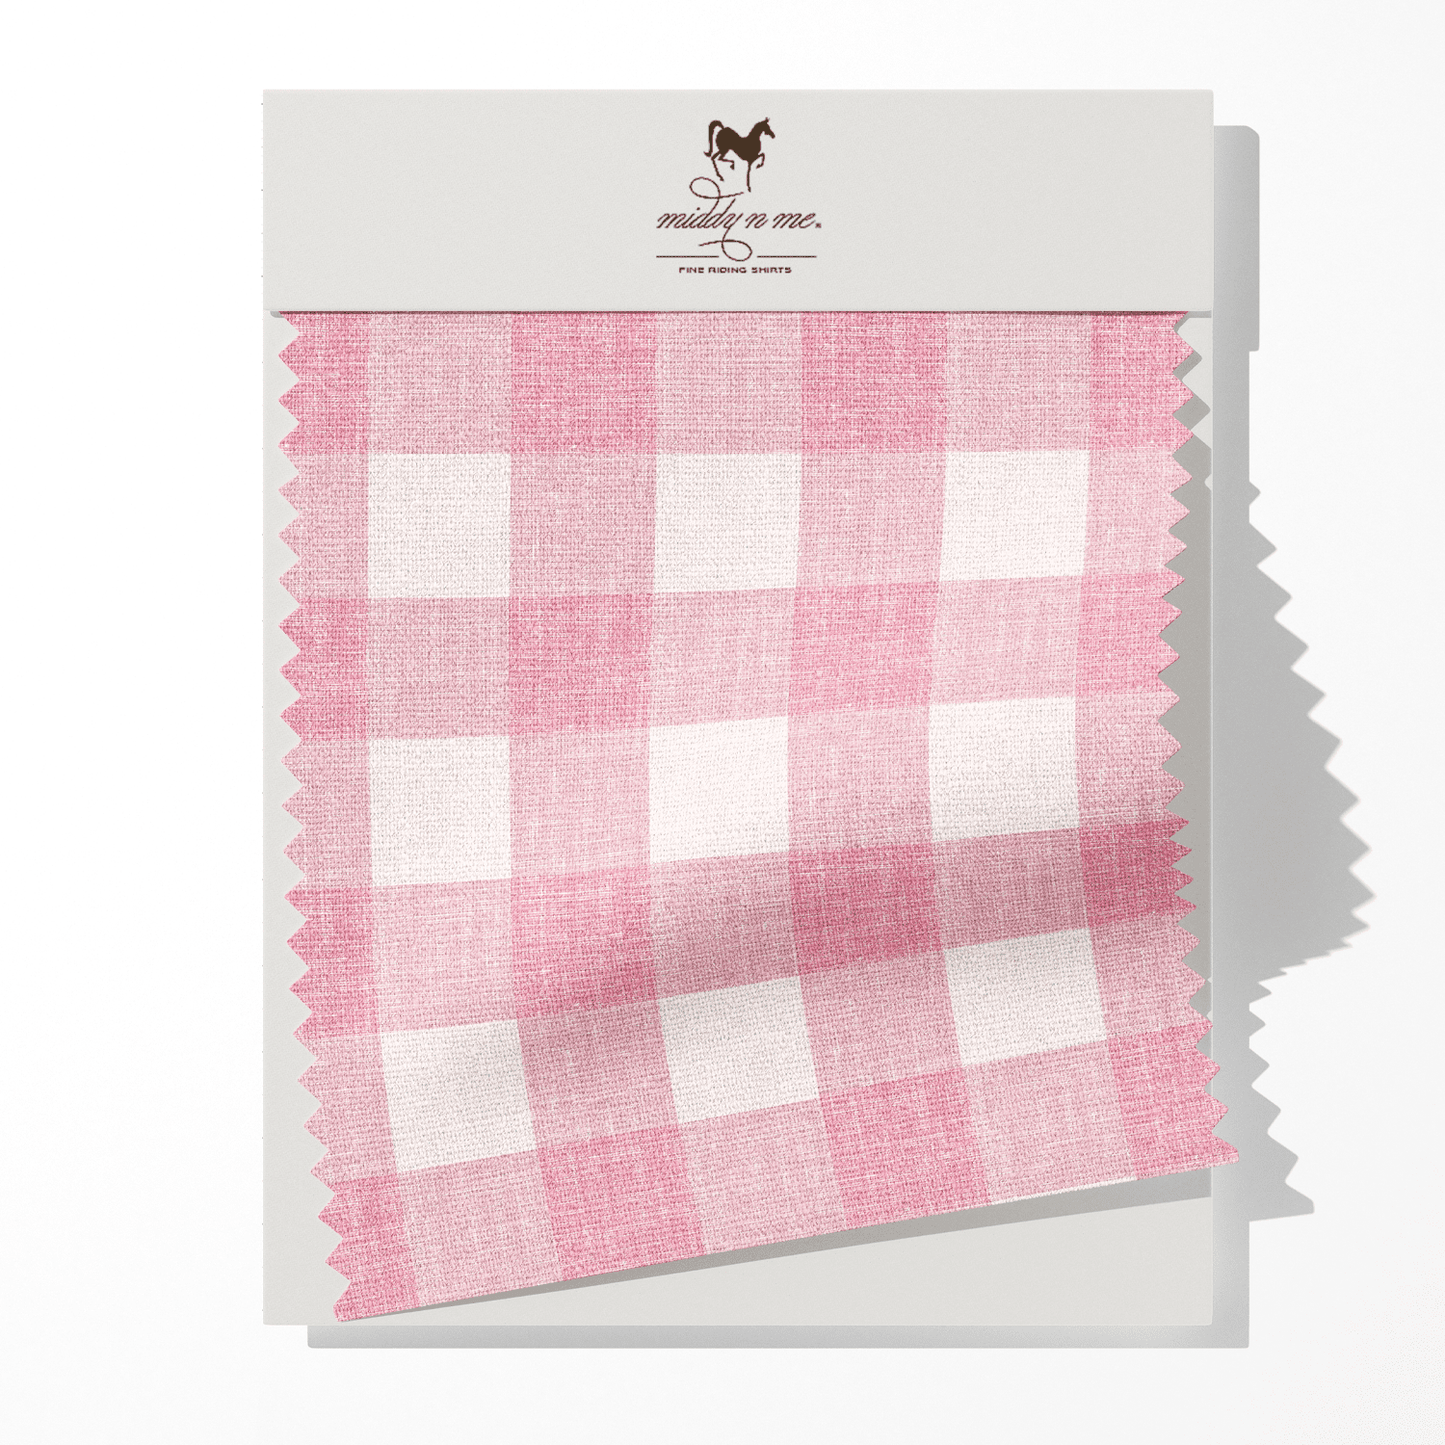 1" GINGHAM FABRIC IN PINK - Middy N' Me